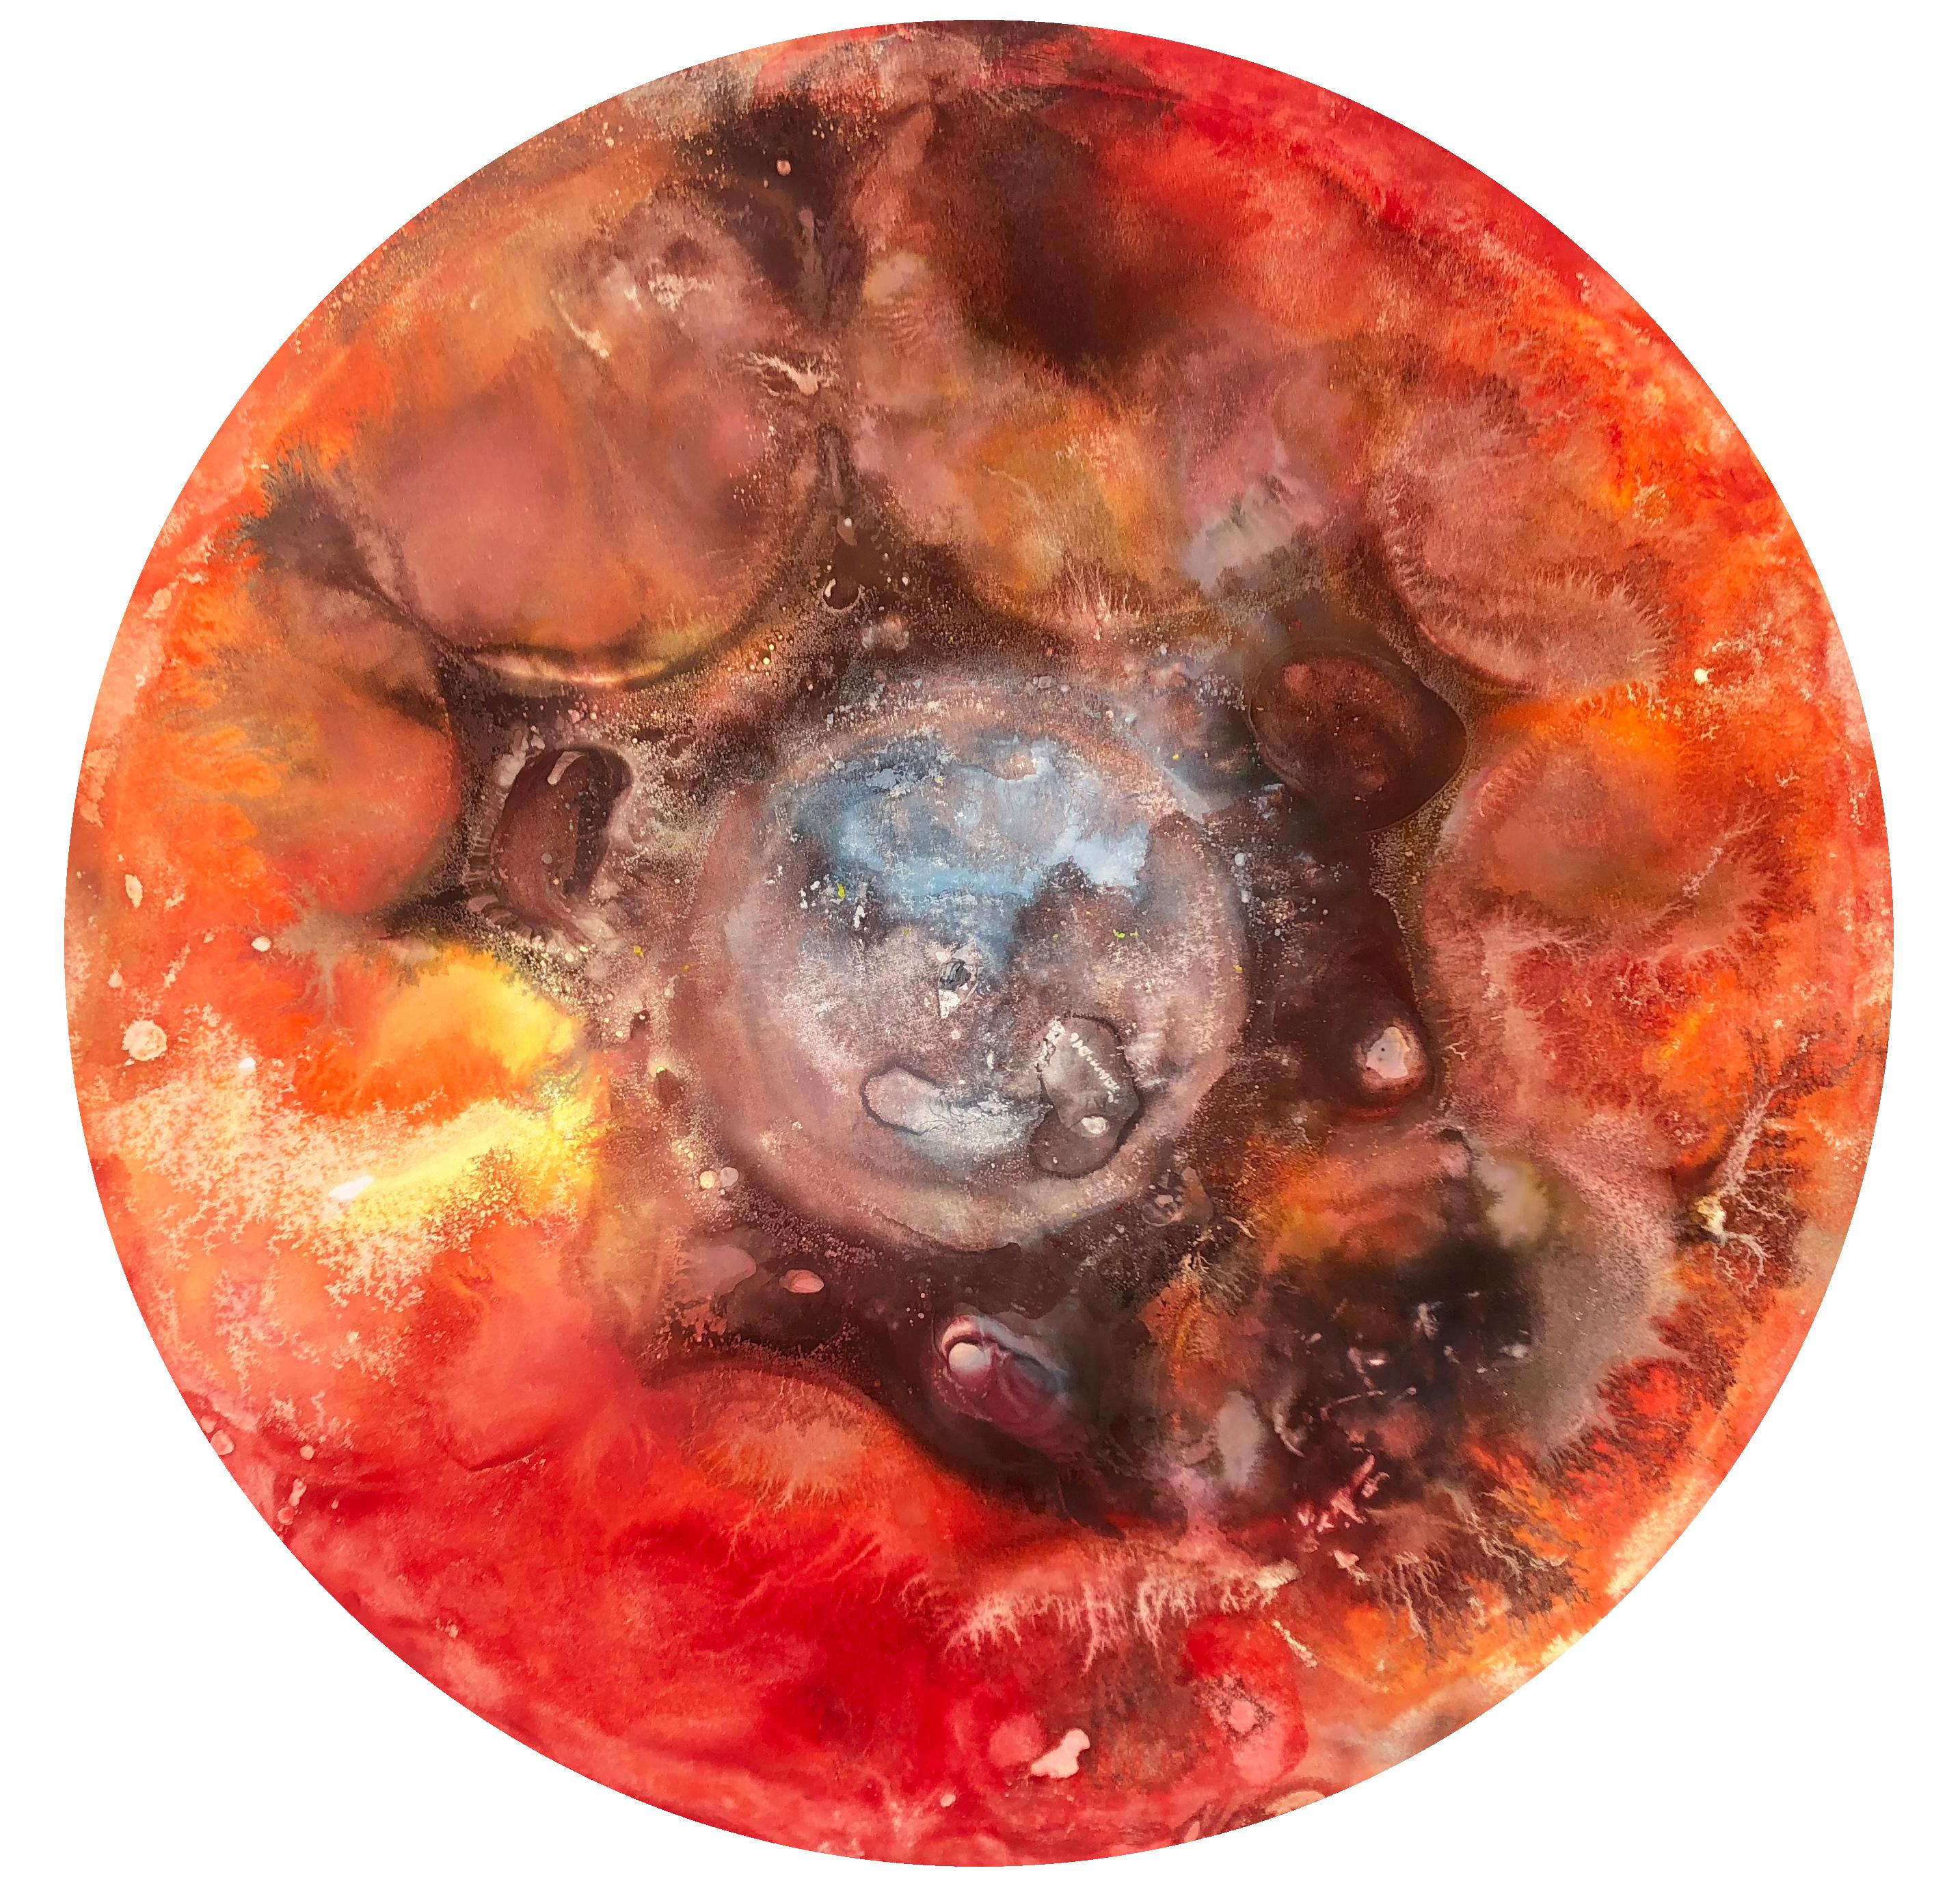 Painting on canvas 9 Unknowns 2019 Diameter 1m by Volodymyr Zayichenko
In red, brown, orange, yellow, white, blue
Available in cryptocurrencies
Unique painting on canvas is guaranteed to be included in a Catalogue Raisonne and provided with a